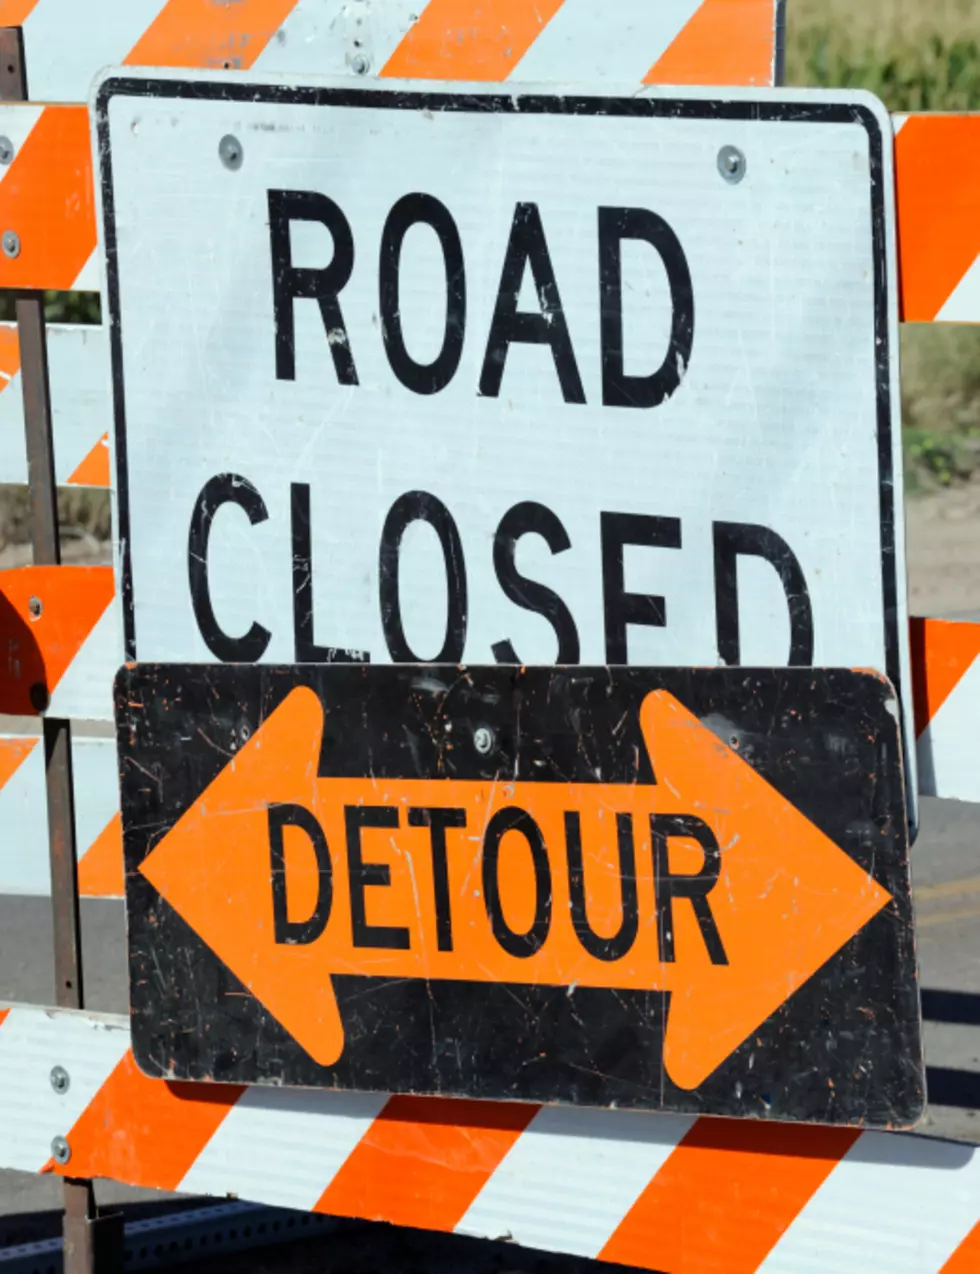 New Bedford to See Downtown Traffic Detours February 3-8